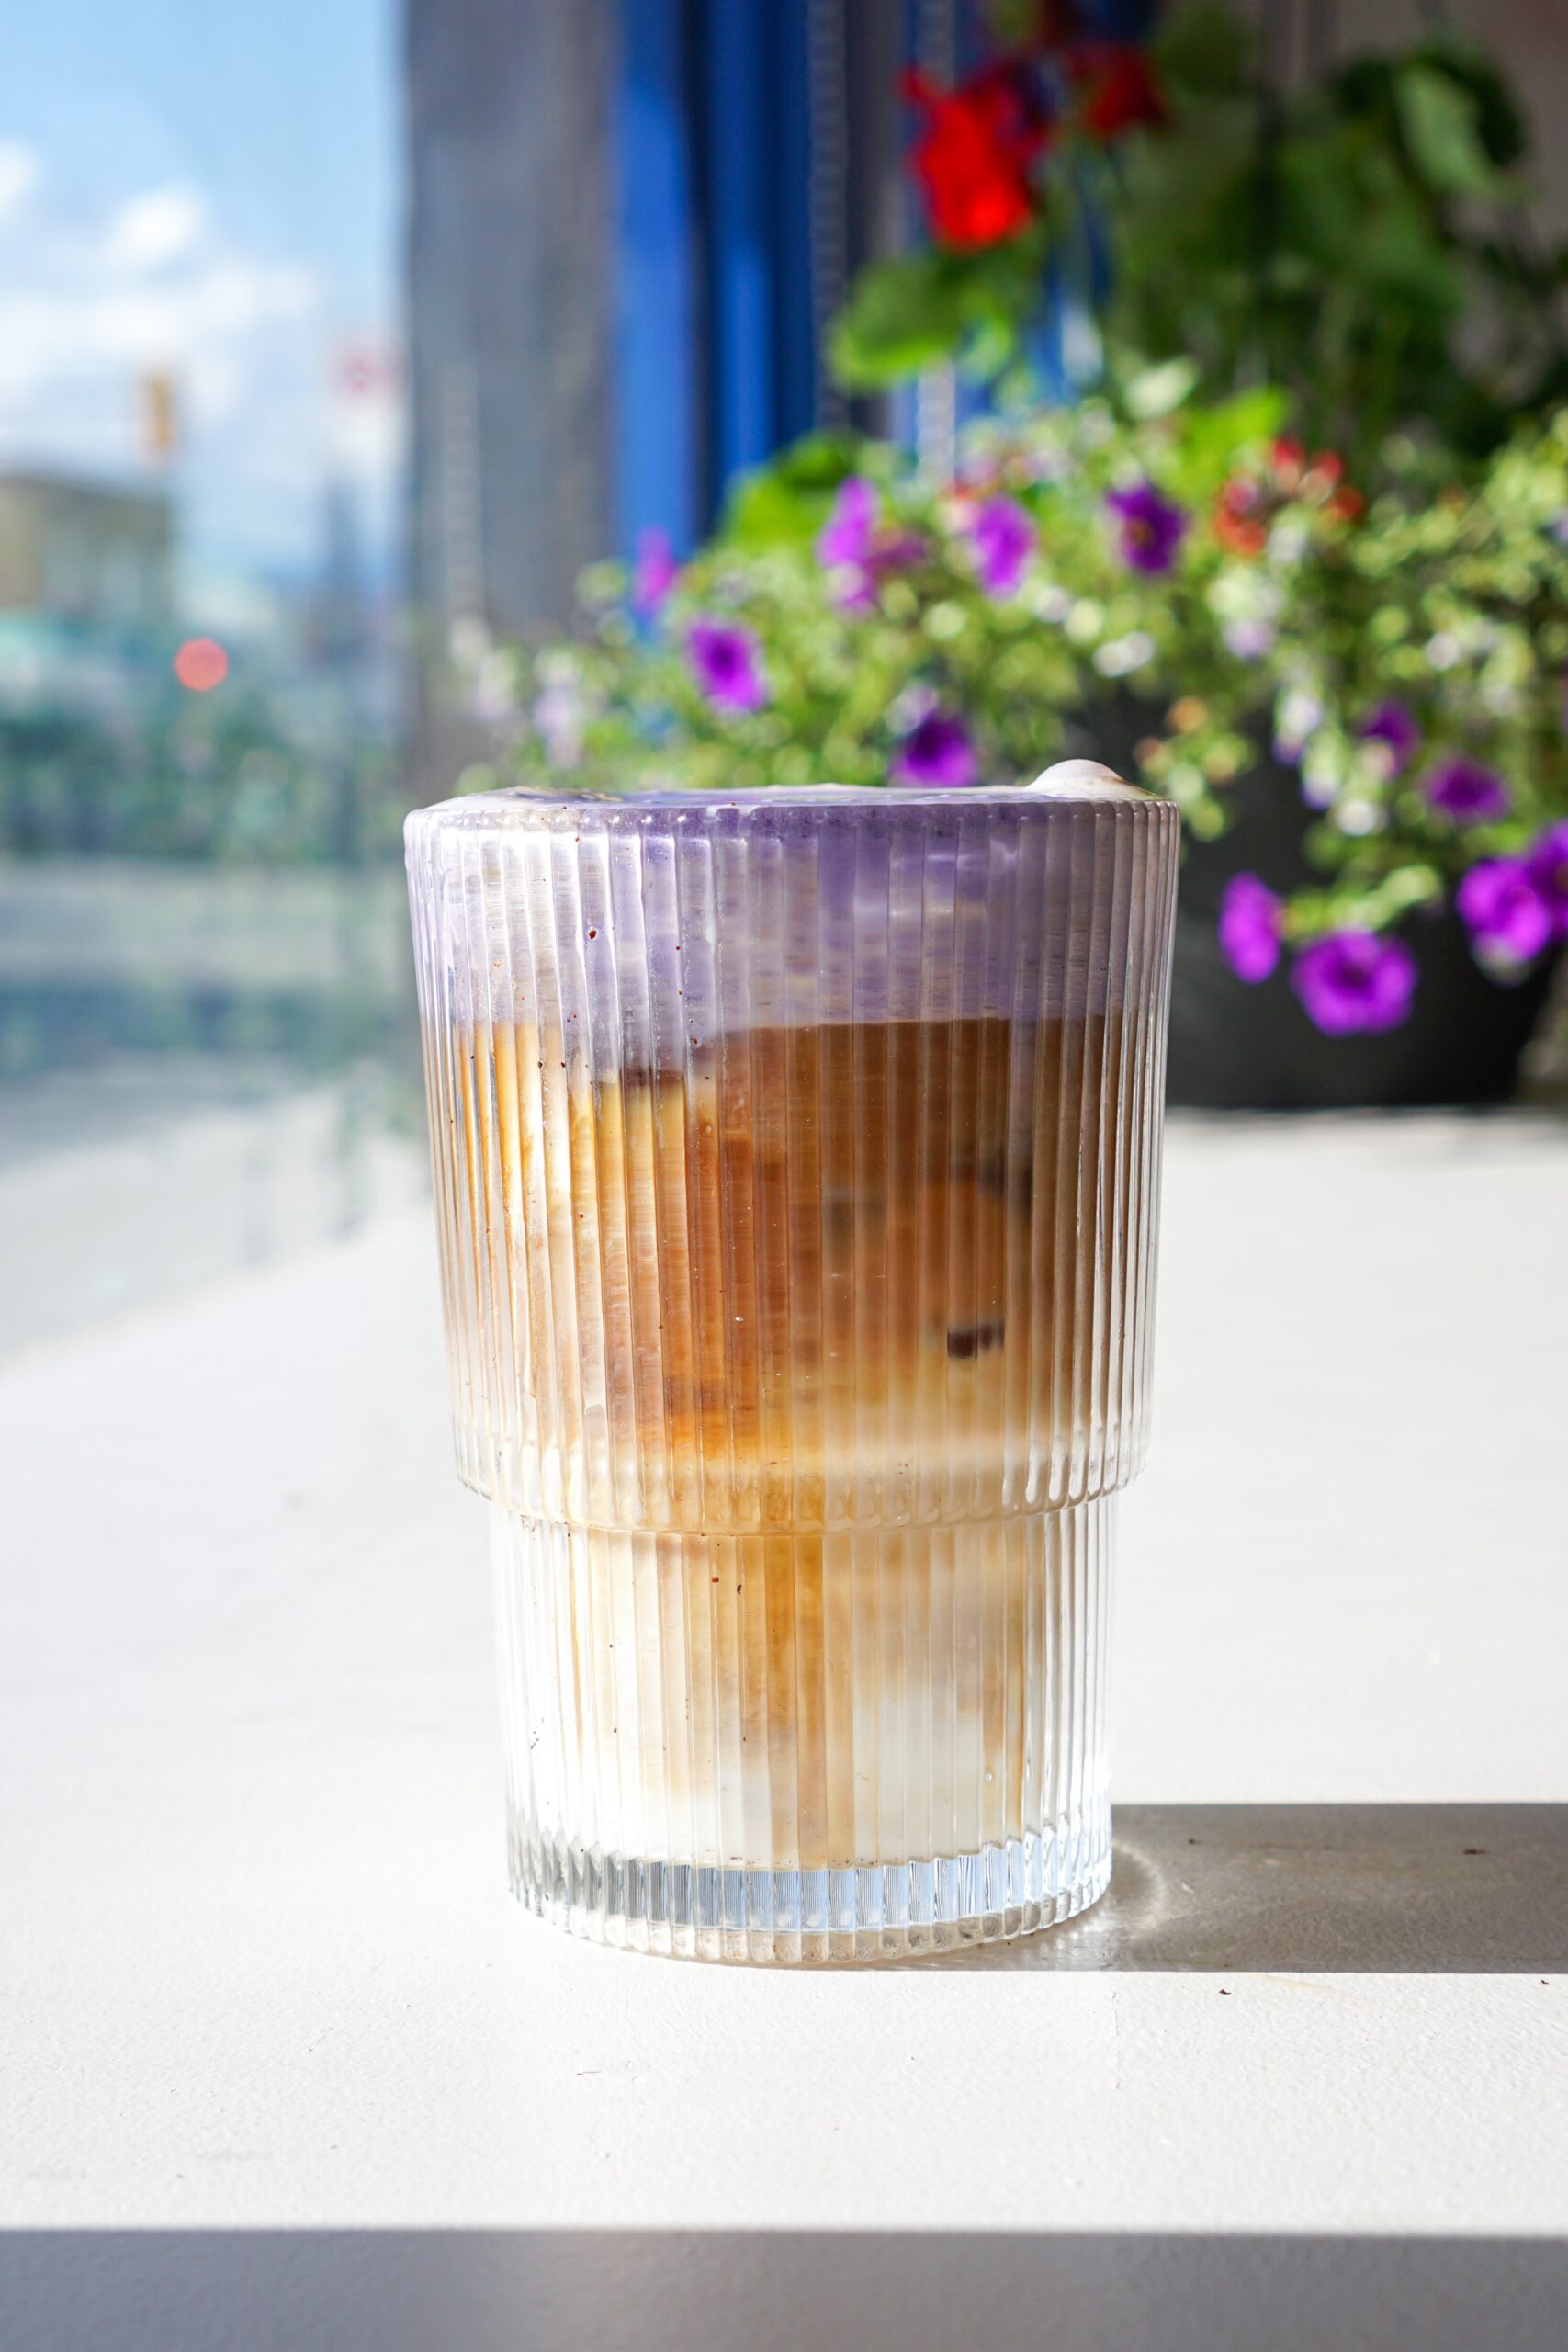 Hem 377 new vietnamese cafe on Victoria Drive in Vancouver ube latte with purple ube topping and coffee